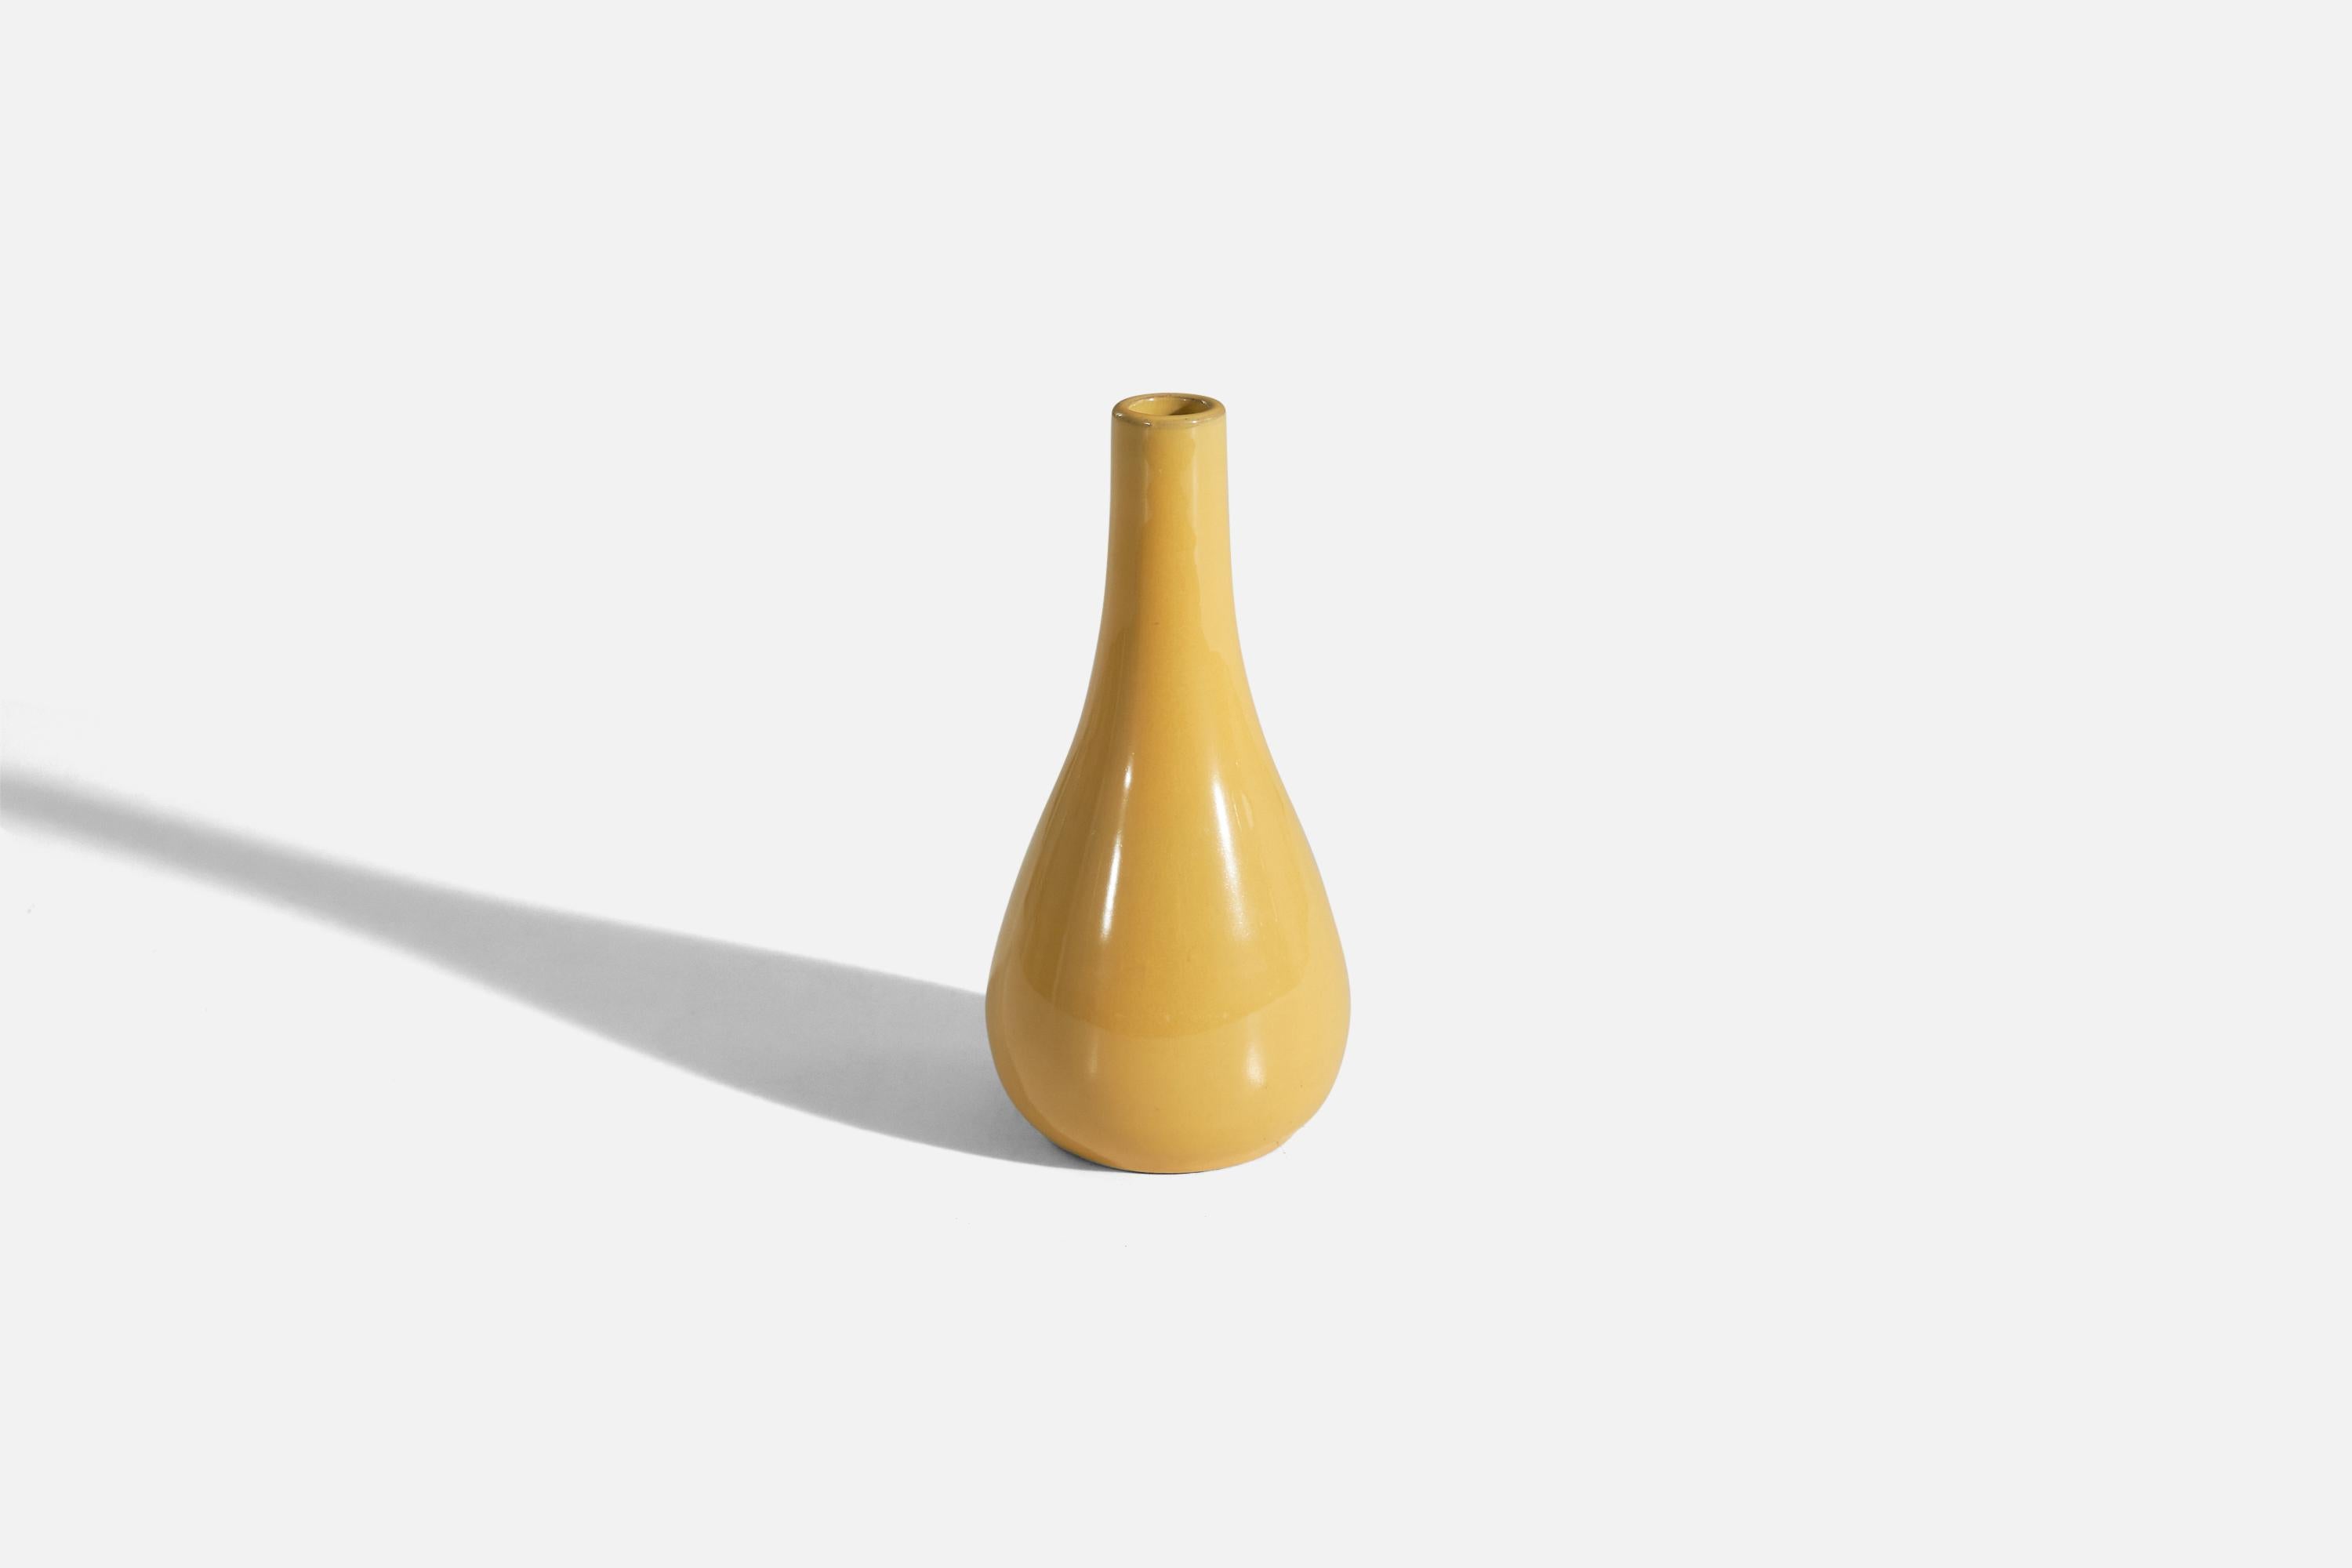 A yellow, glazed stoneware vase designed and produced by Andersson & Johansson, Höganäs, Sweden, c. 1940s.